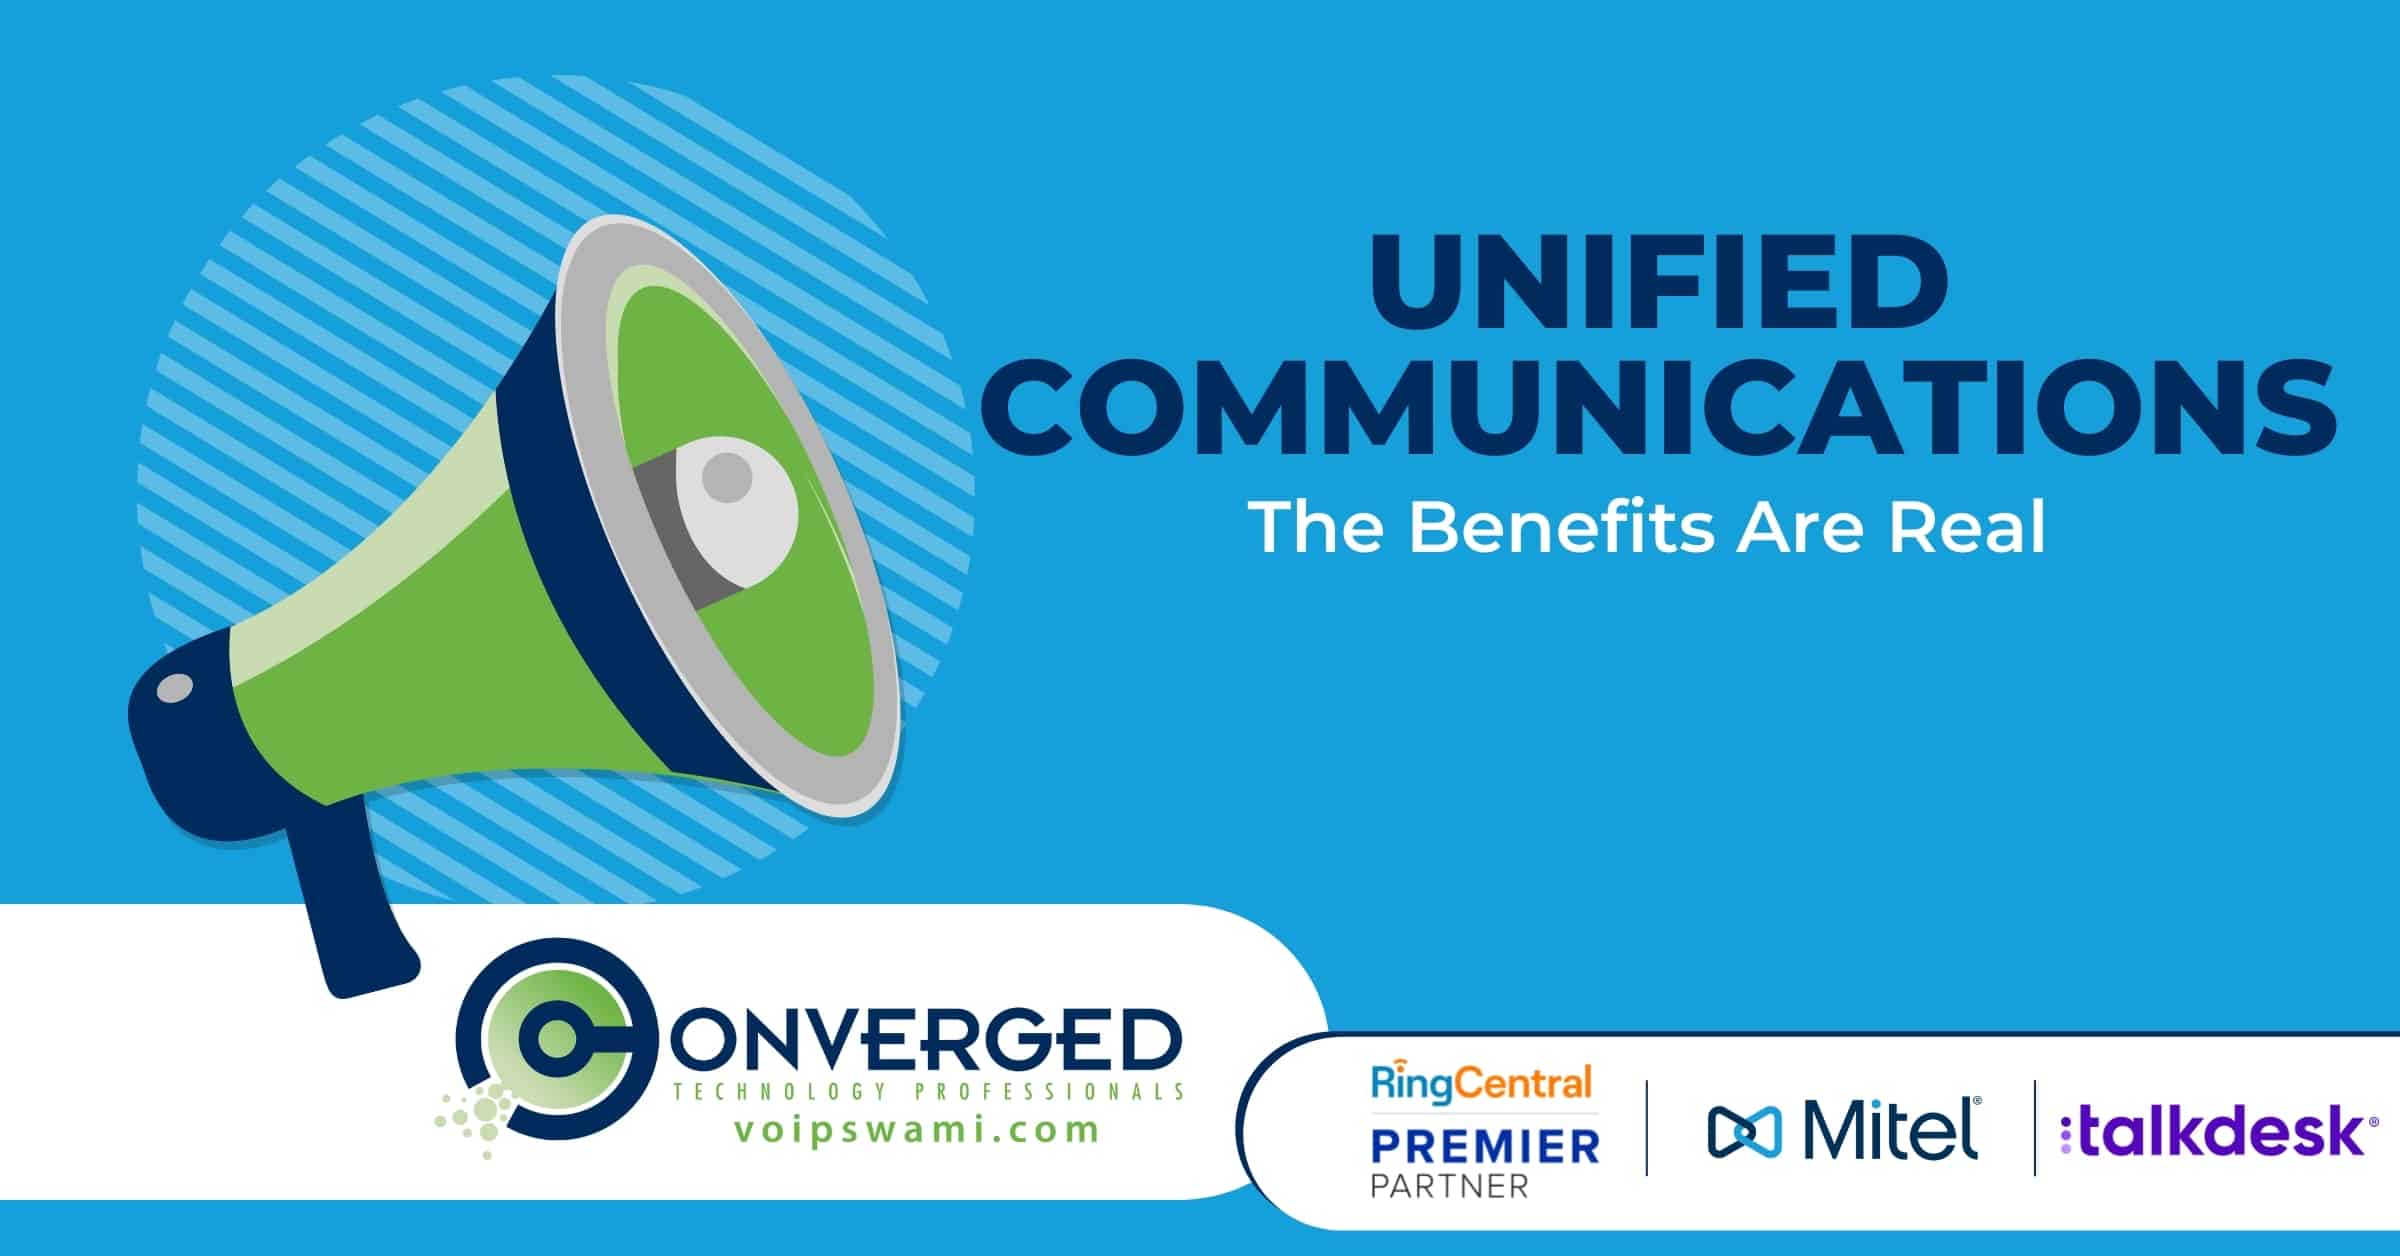 Unified Communications The Benefits Are Real